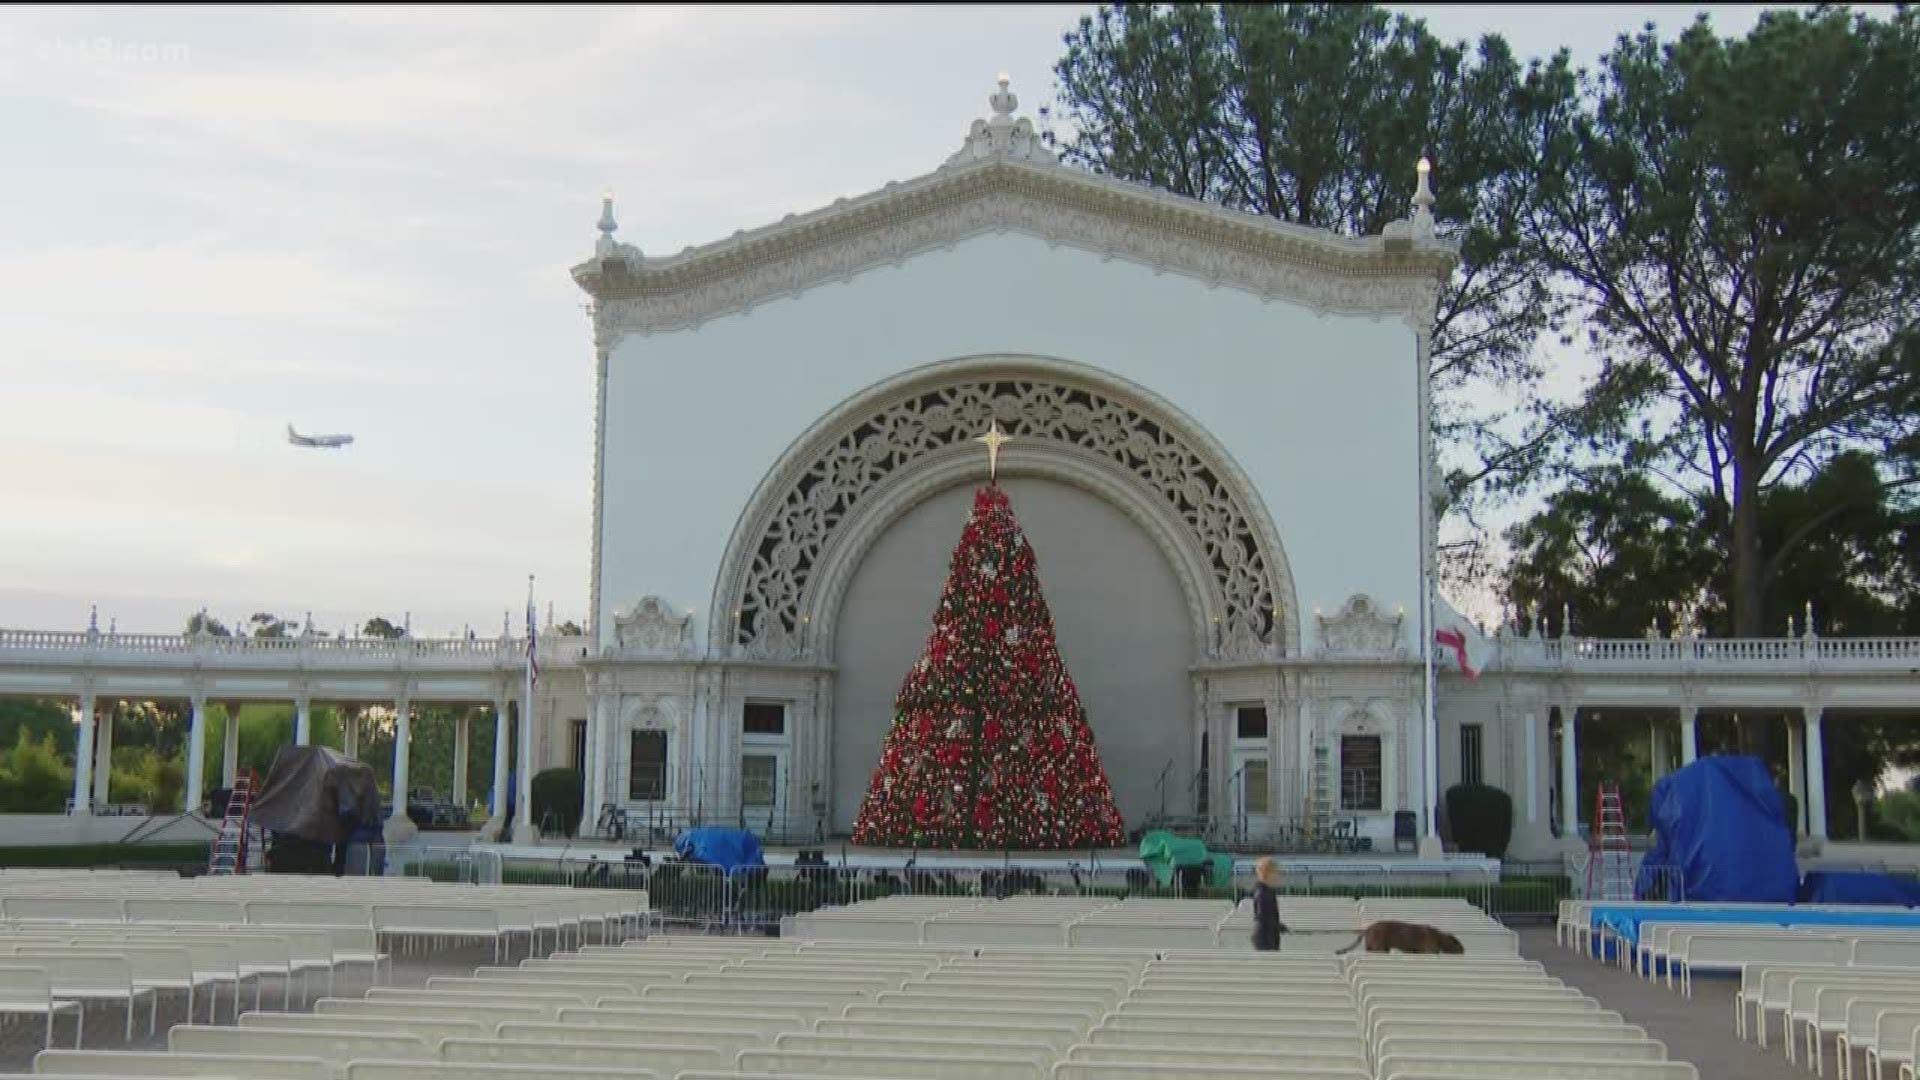 San Diego will kick off the 42nd annual two-day December Nights holiday celebration Friday in Balboa Park, with more than 350,000 people expected to attend.